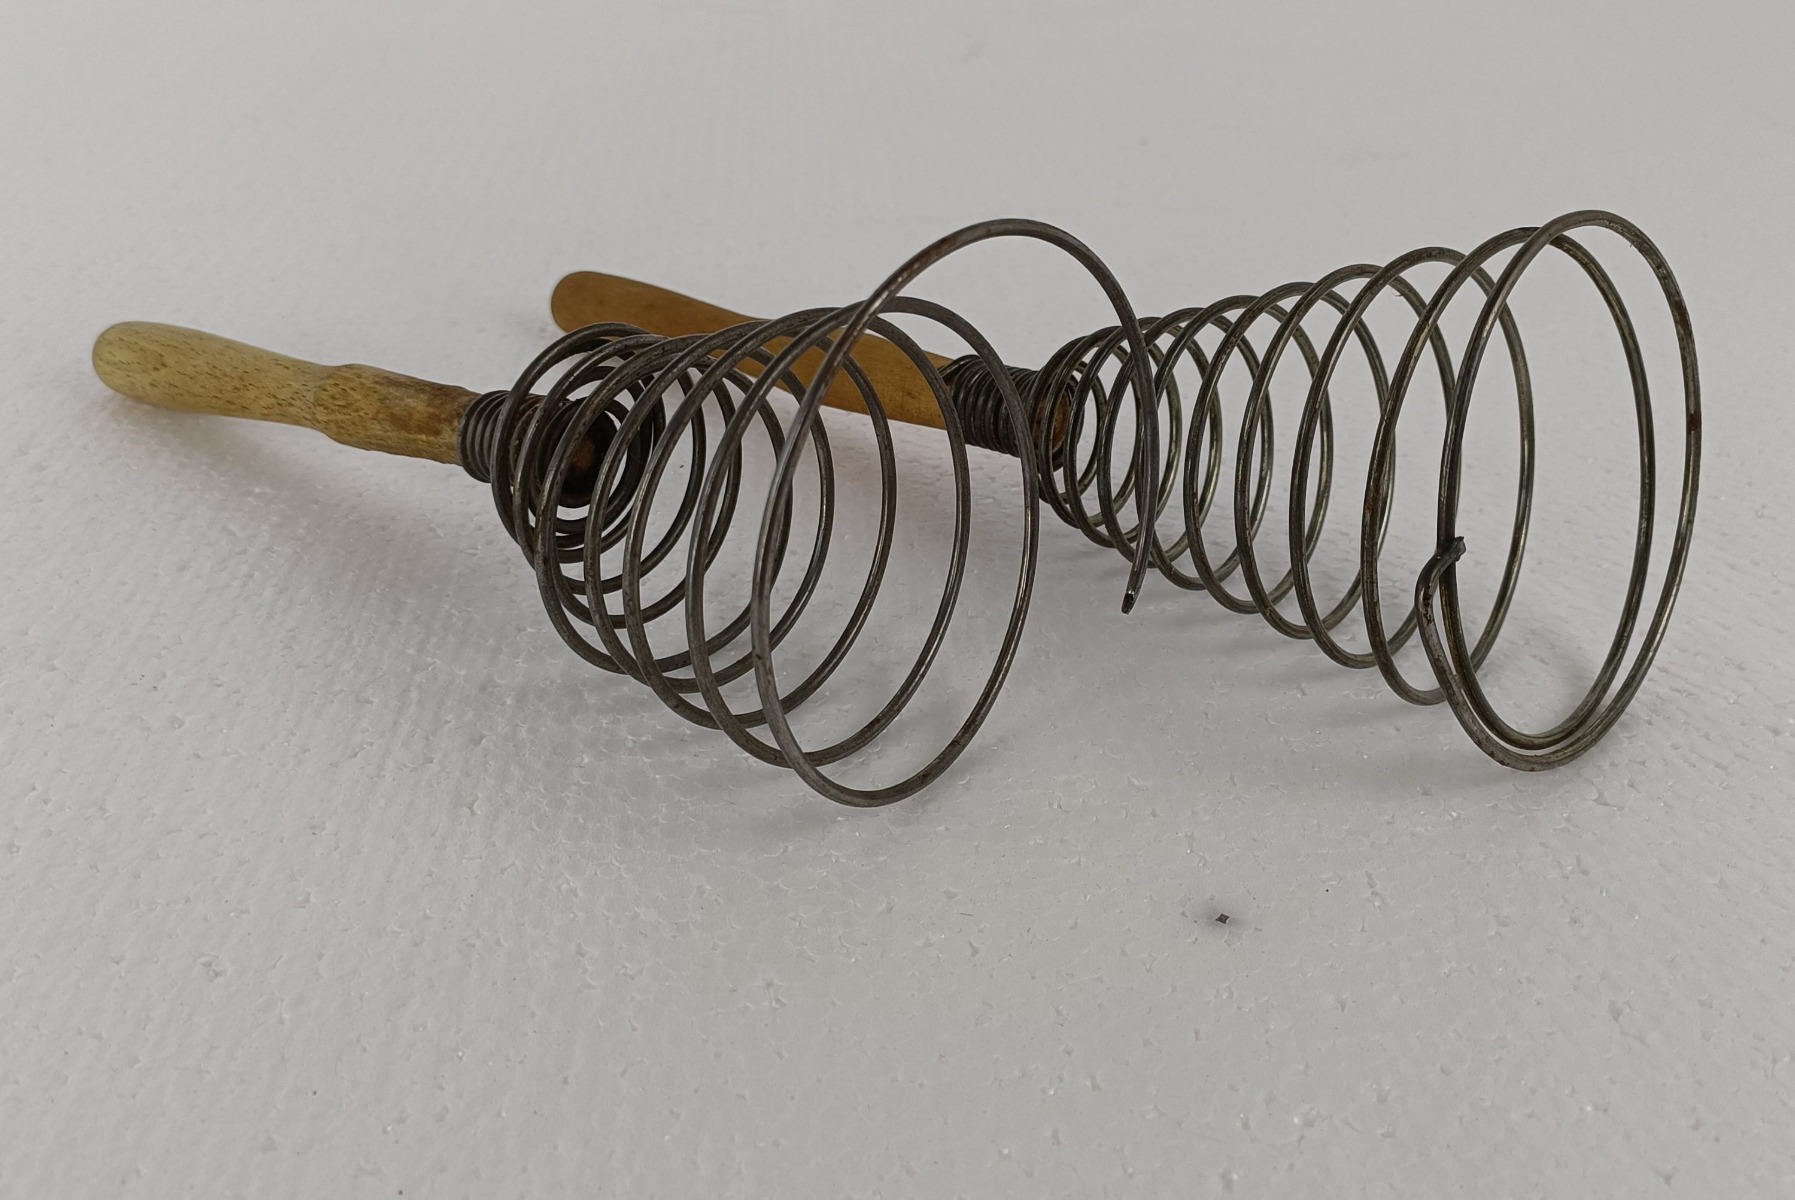 Antique / Spring Wire Whisk / Egg Beater / Sweden / Expandable